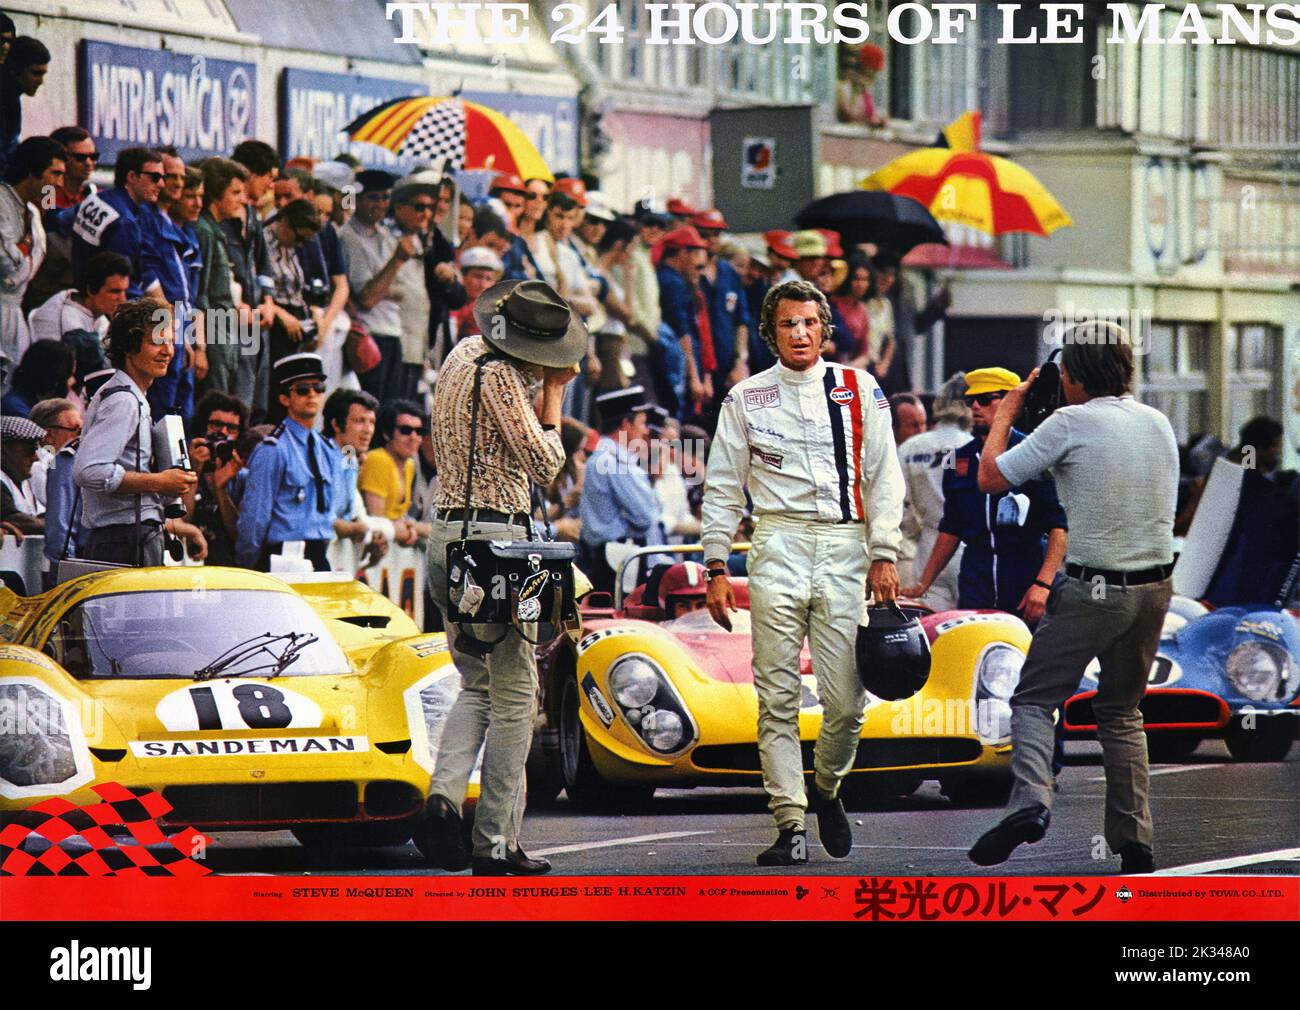 Le Mans is a 1971 film depicting a fictional 24 Hours of Le Mans auto race starring Steve McQueen and directed by Lee H. Katzin. Stock Photo